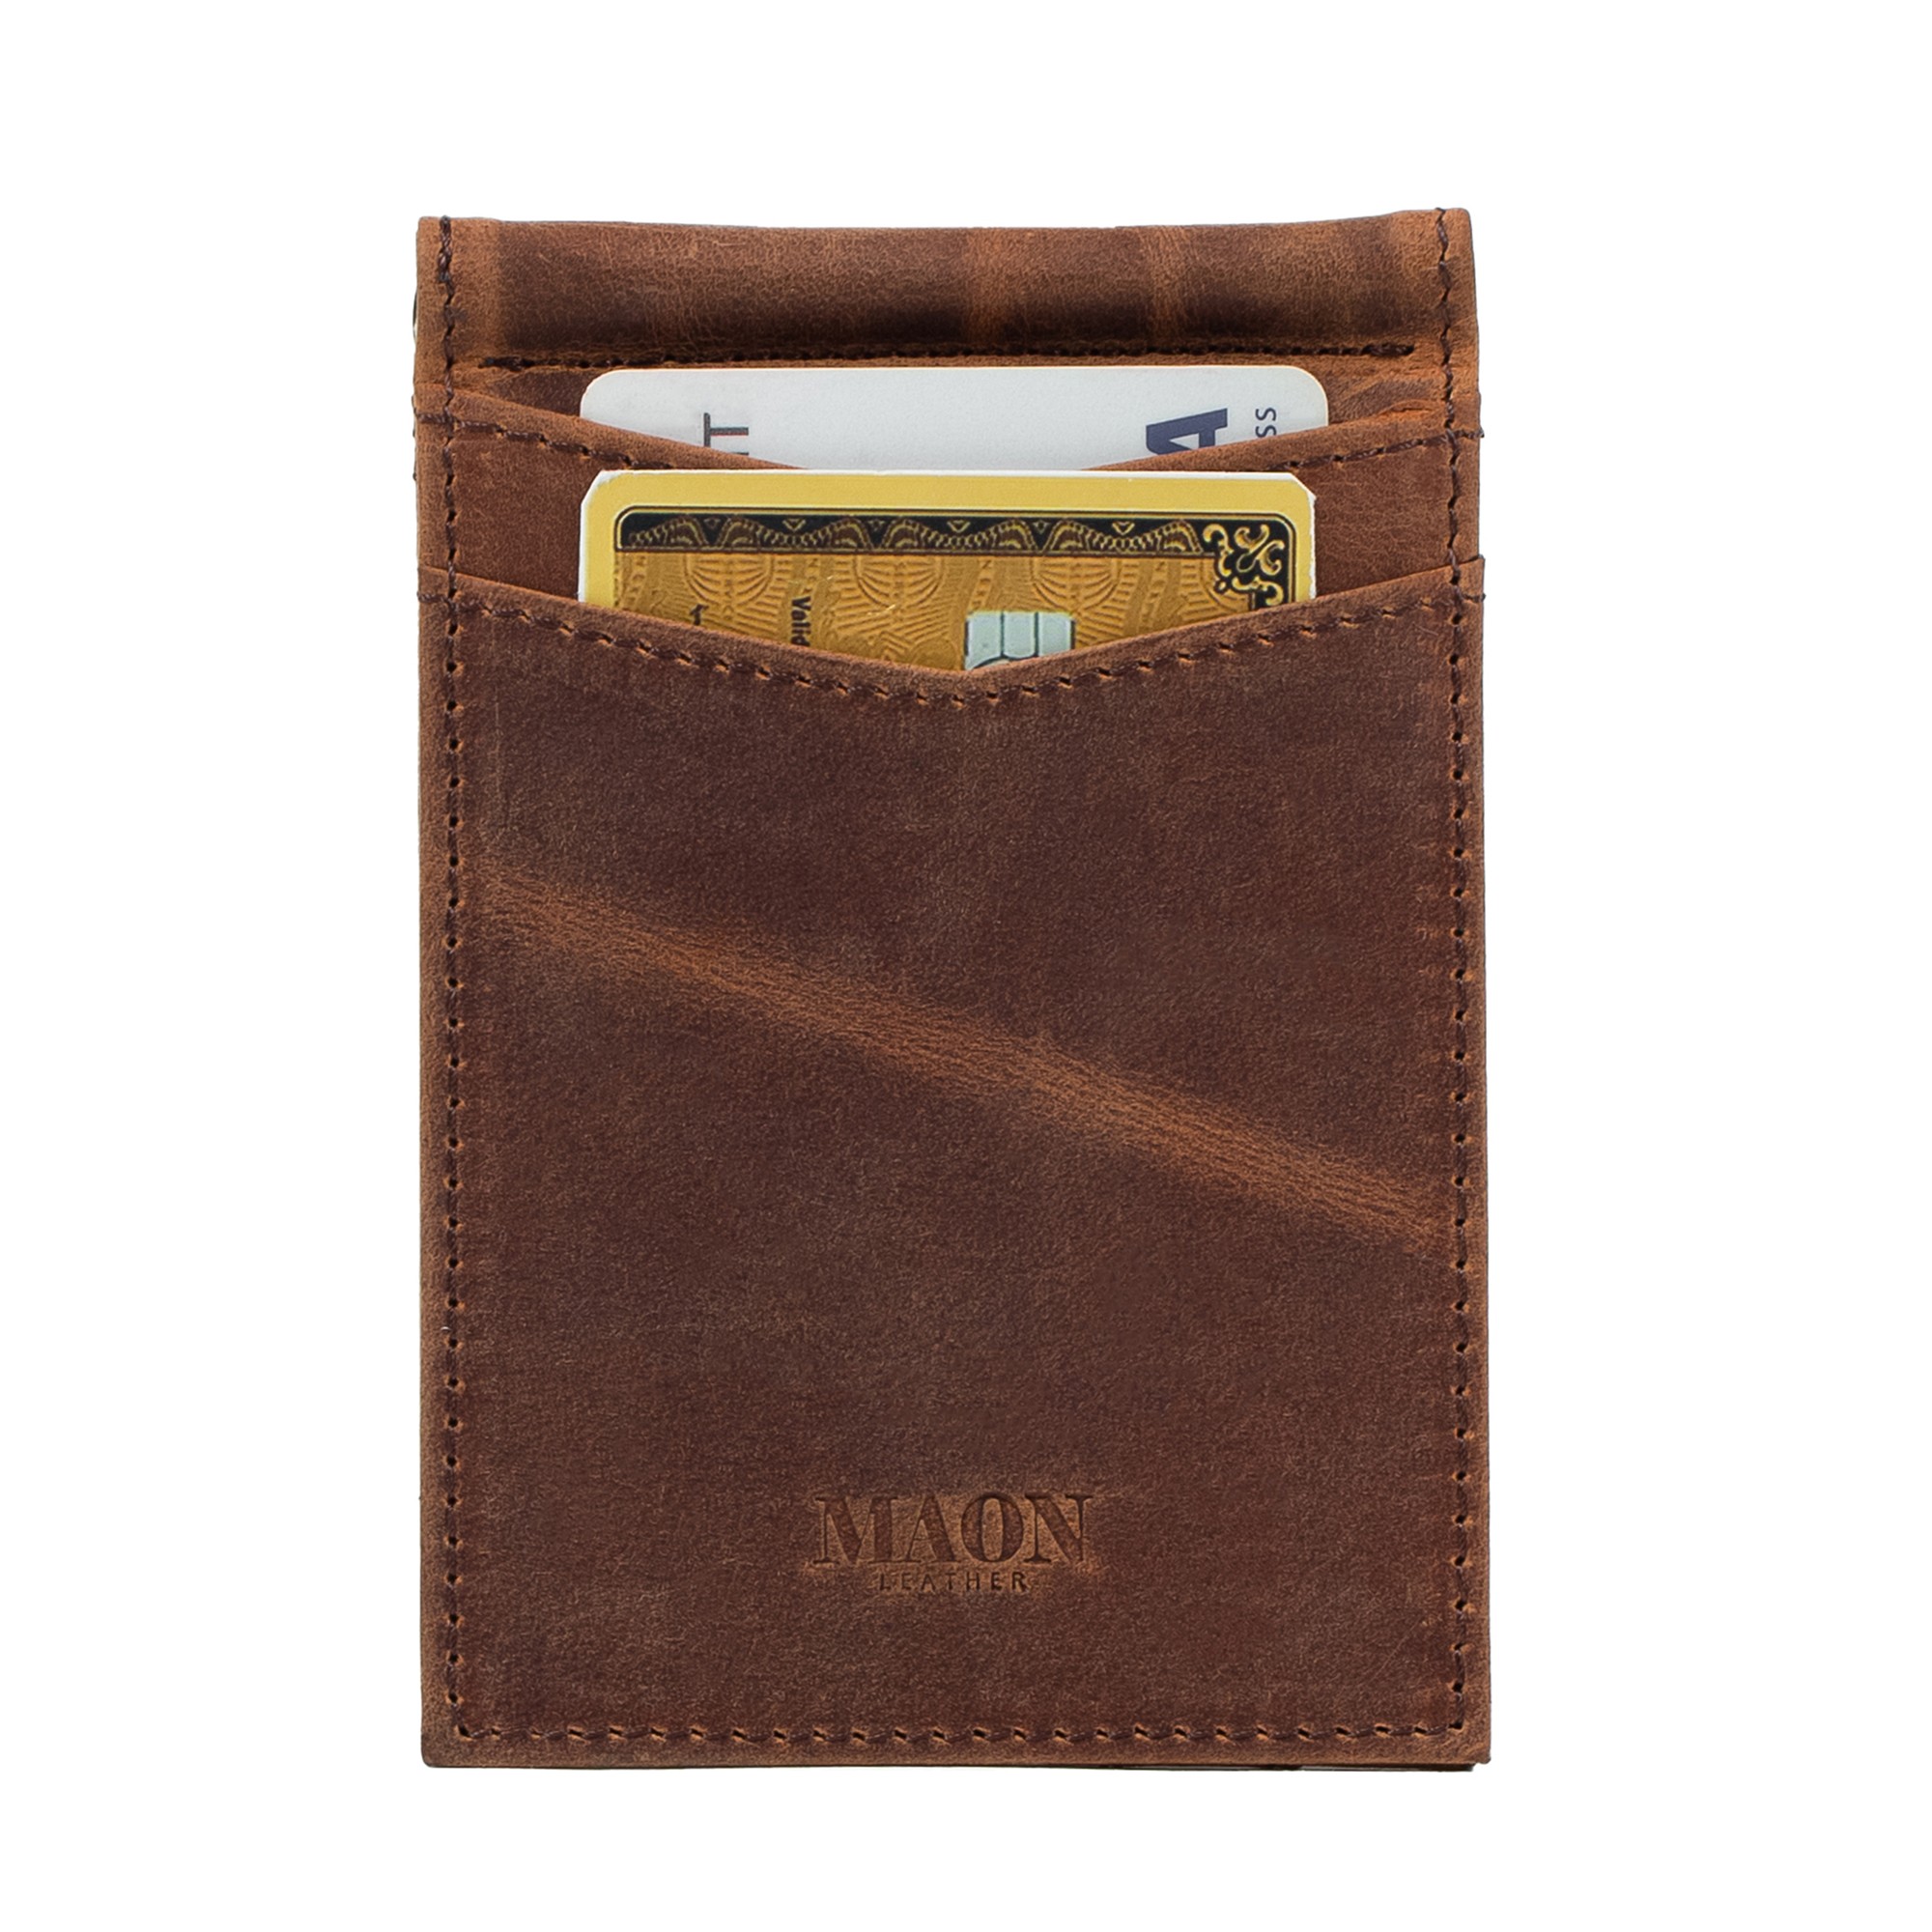 Mens Slim Wallet with Money Clip RFID Blocking Bifold Credit Card Holder for Men with Gift Box - Brown